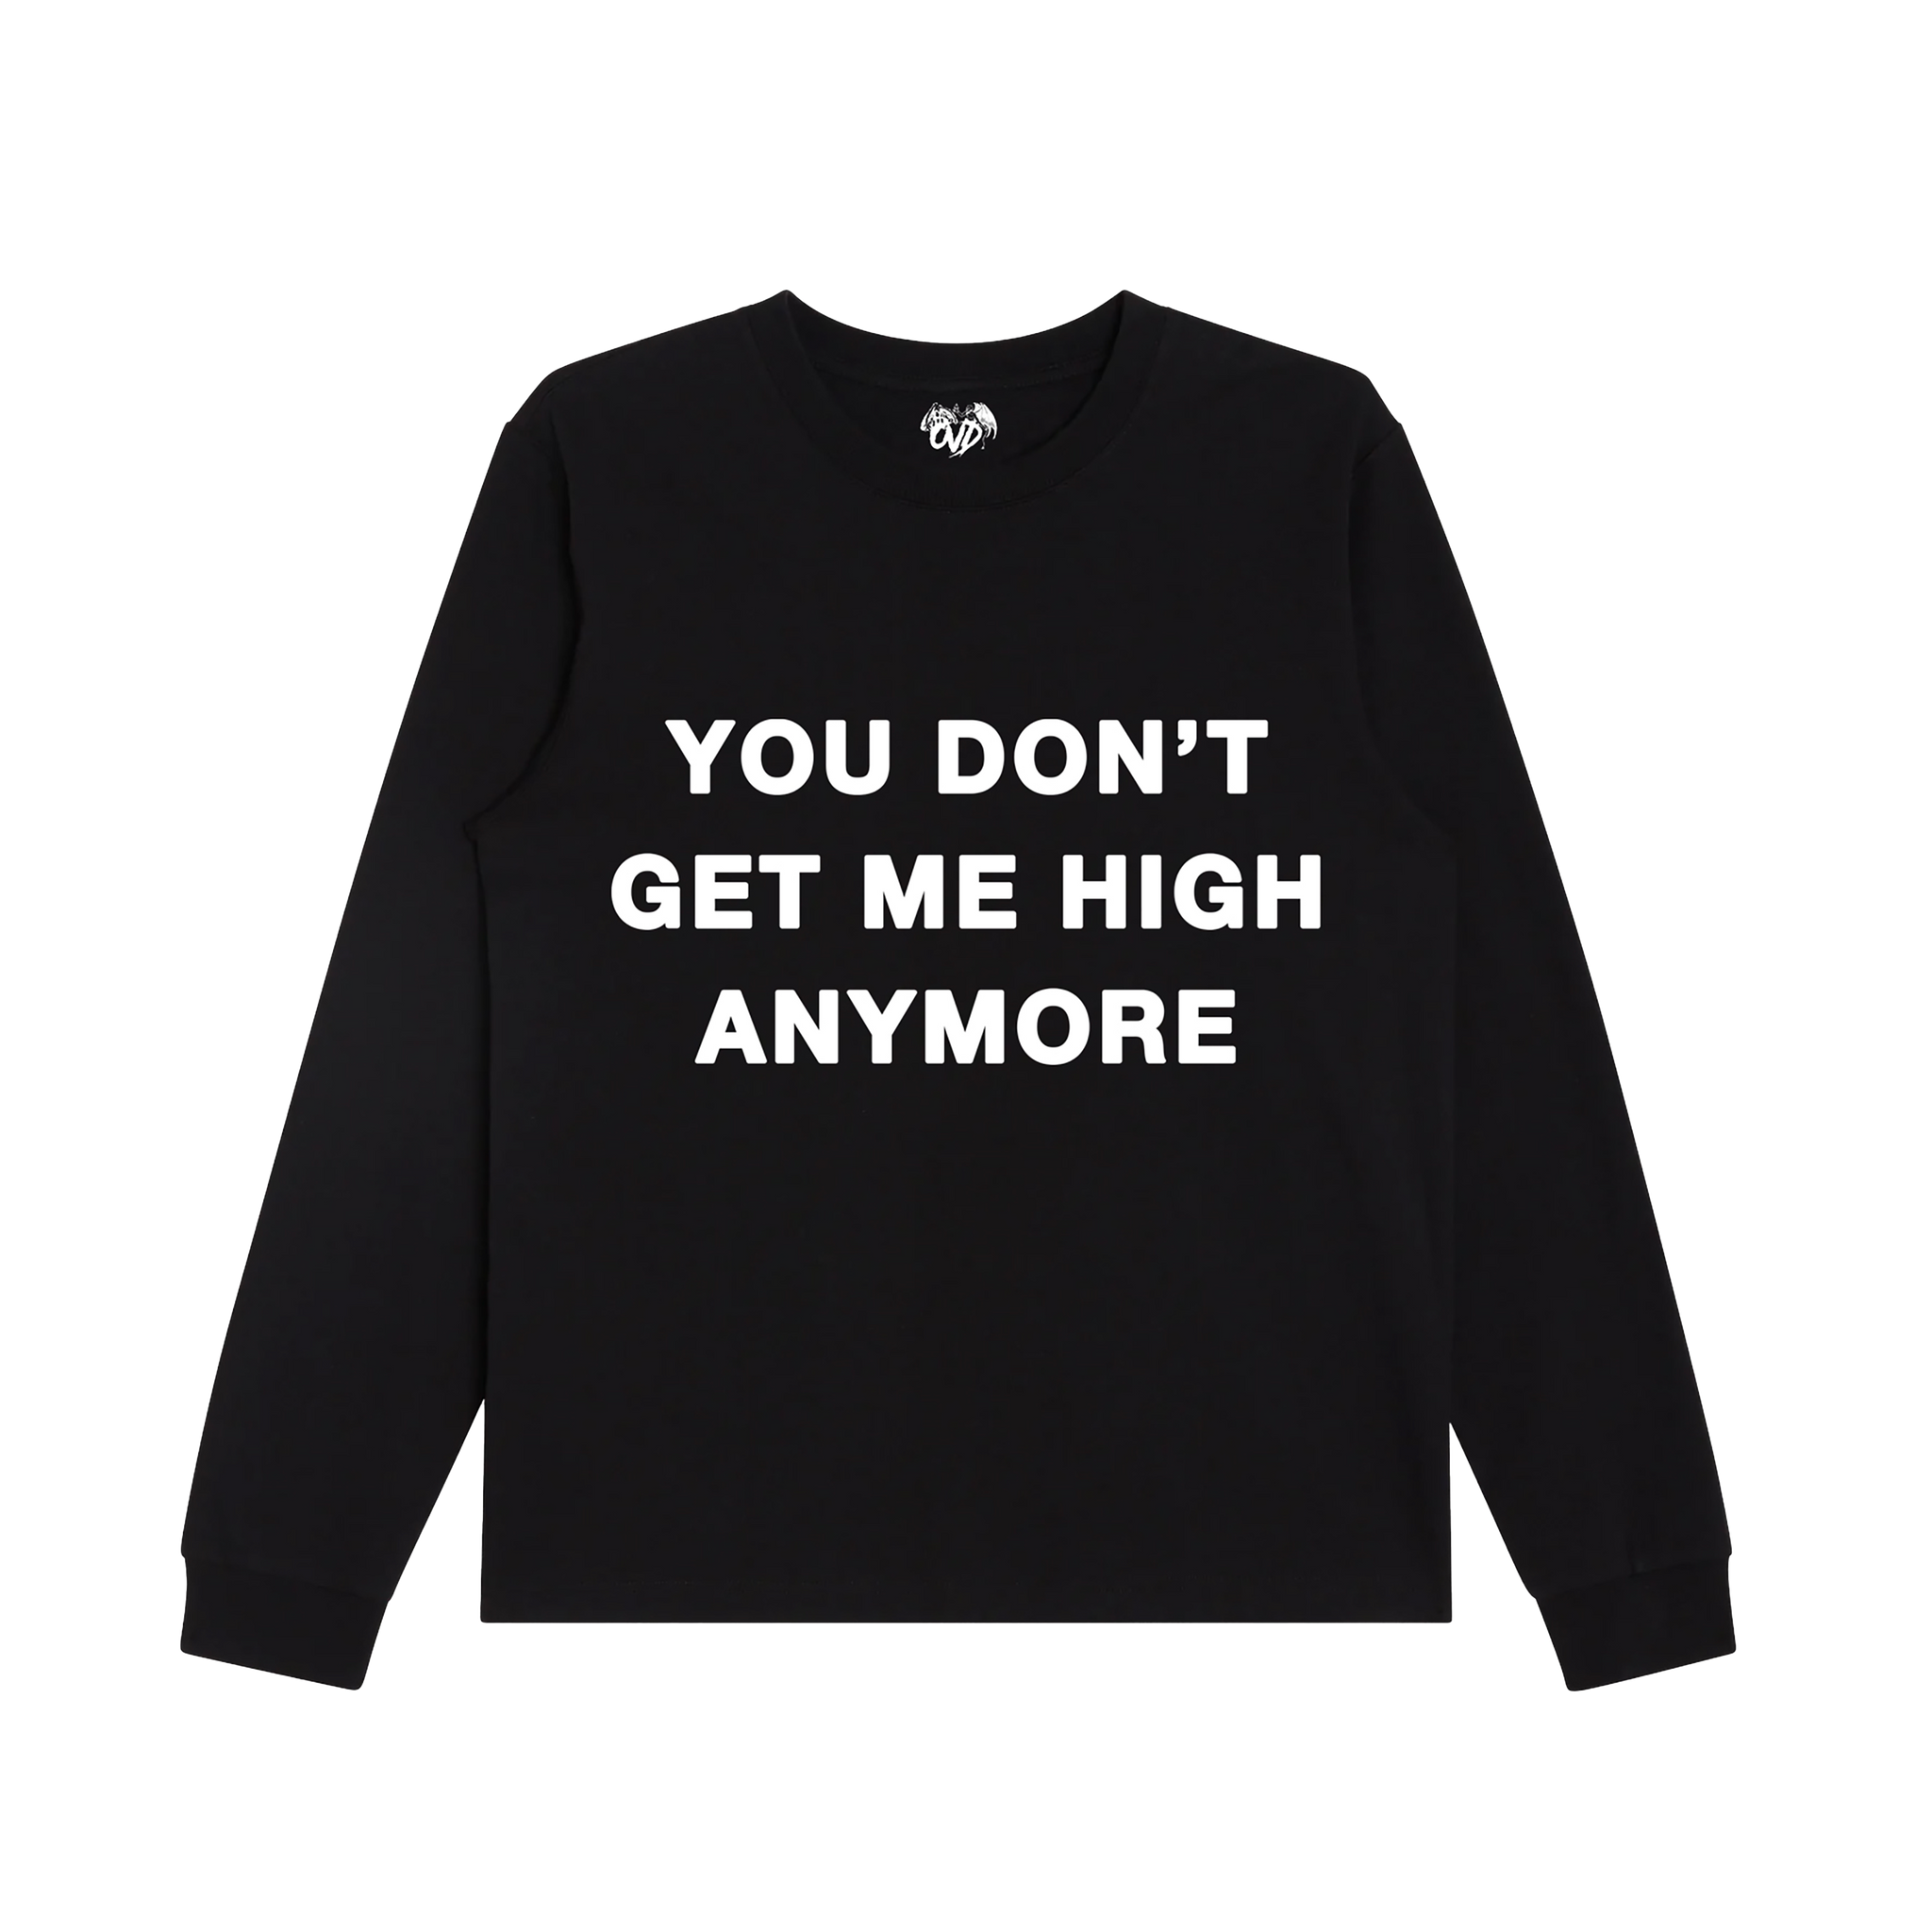 "YOU DON'T GET ME HIGH ANYMORE" - BLACK L/S